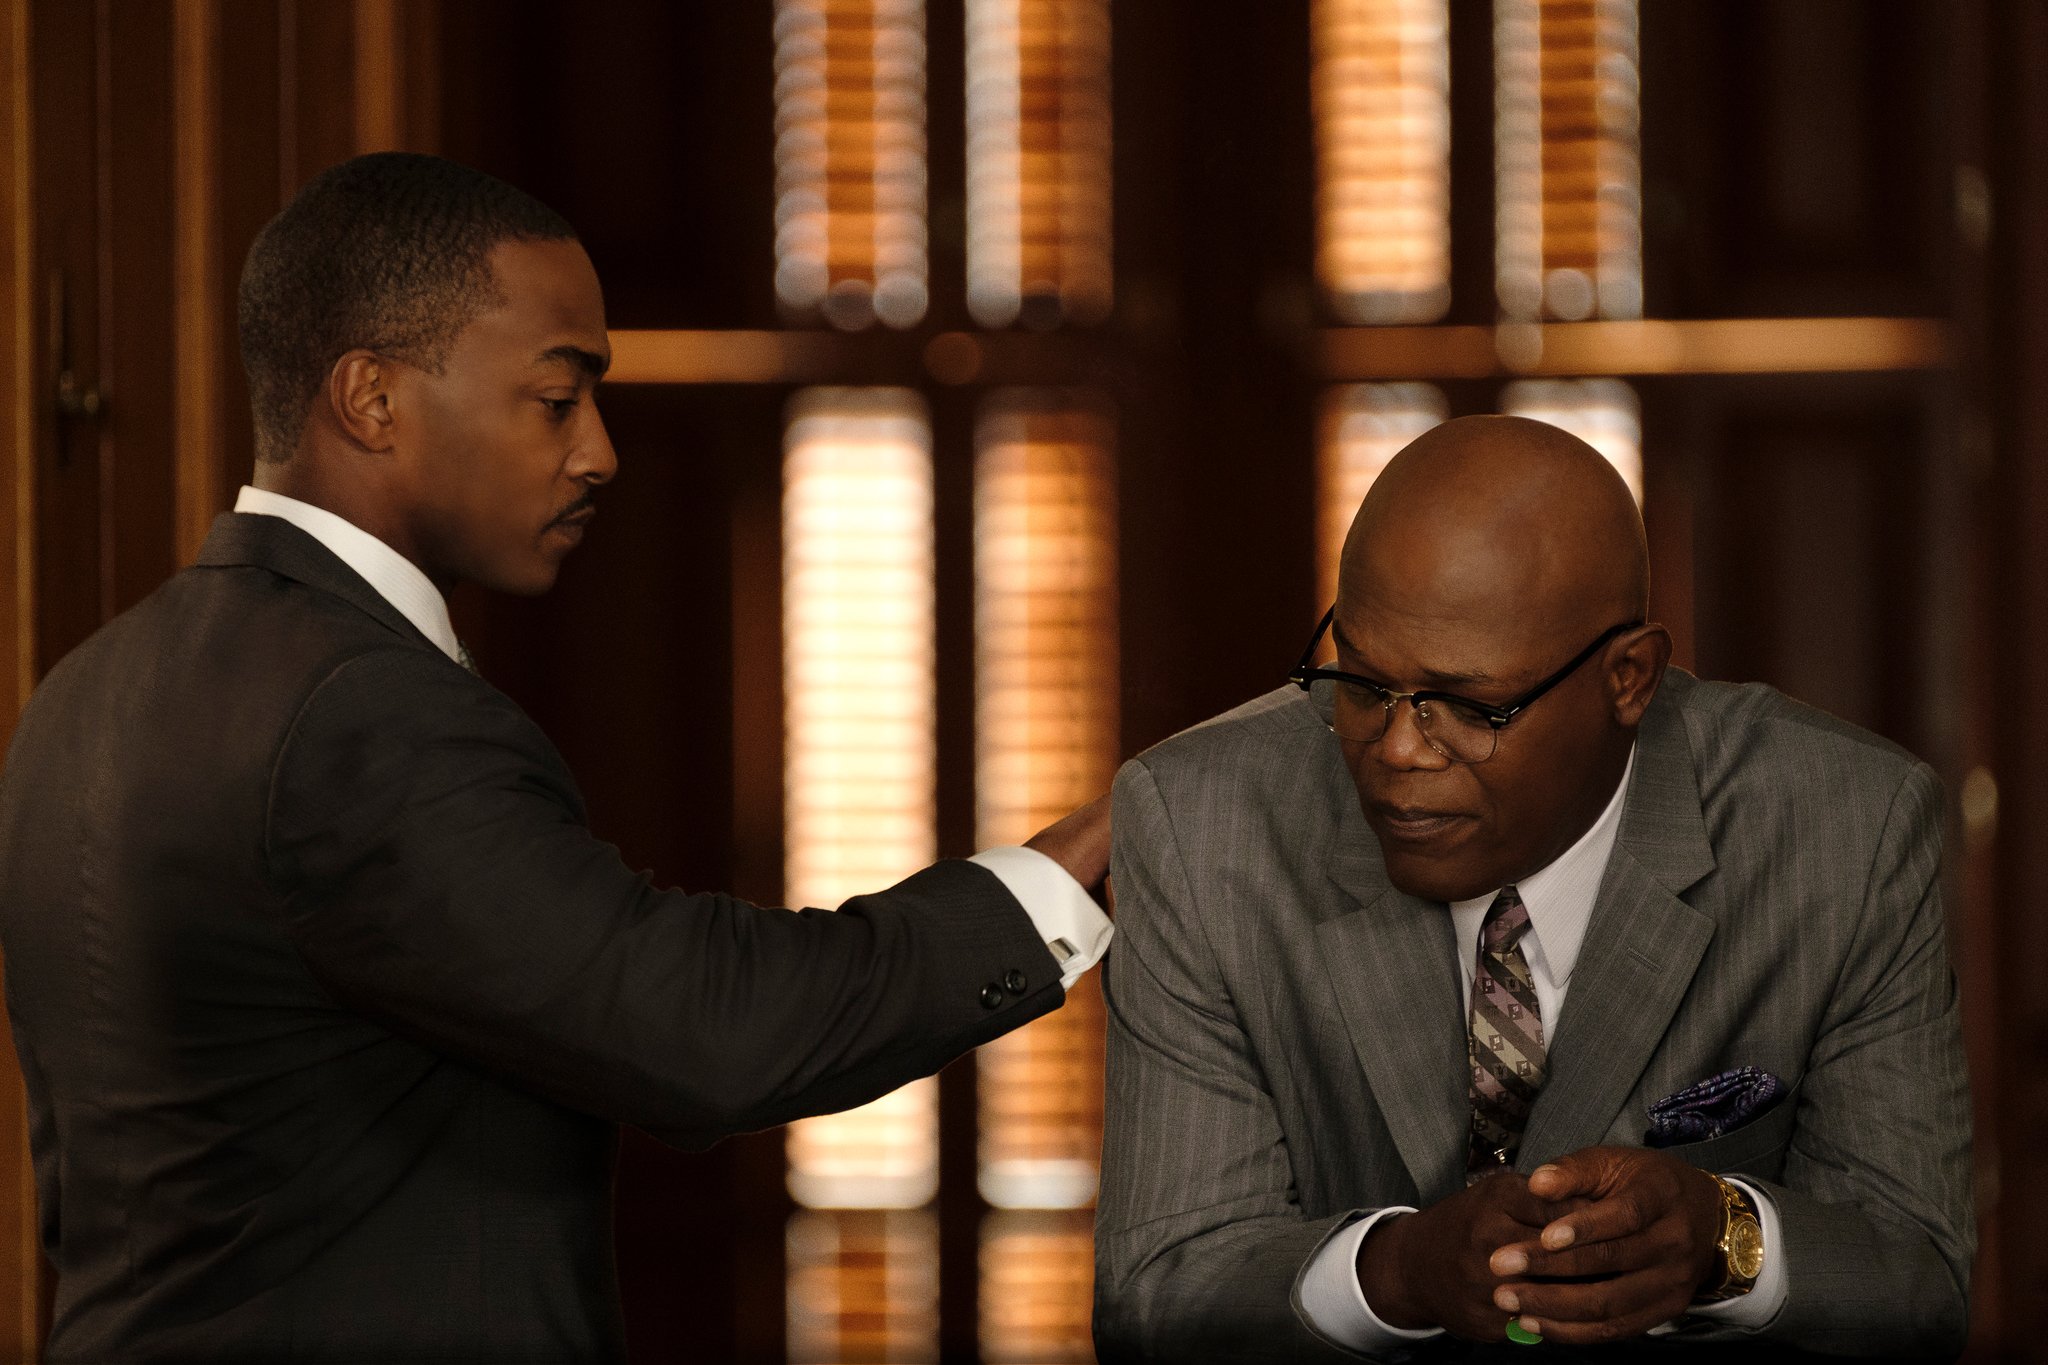 Anthony Mackie and Samuel L. Jackson in The Banker